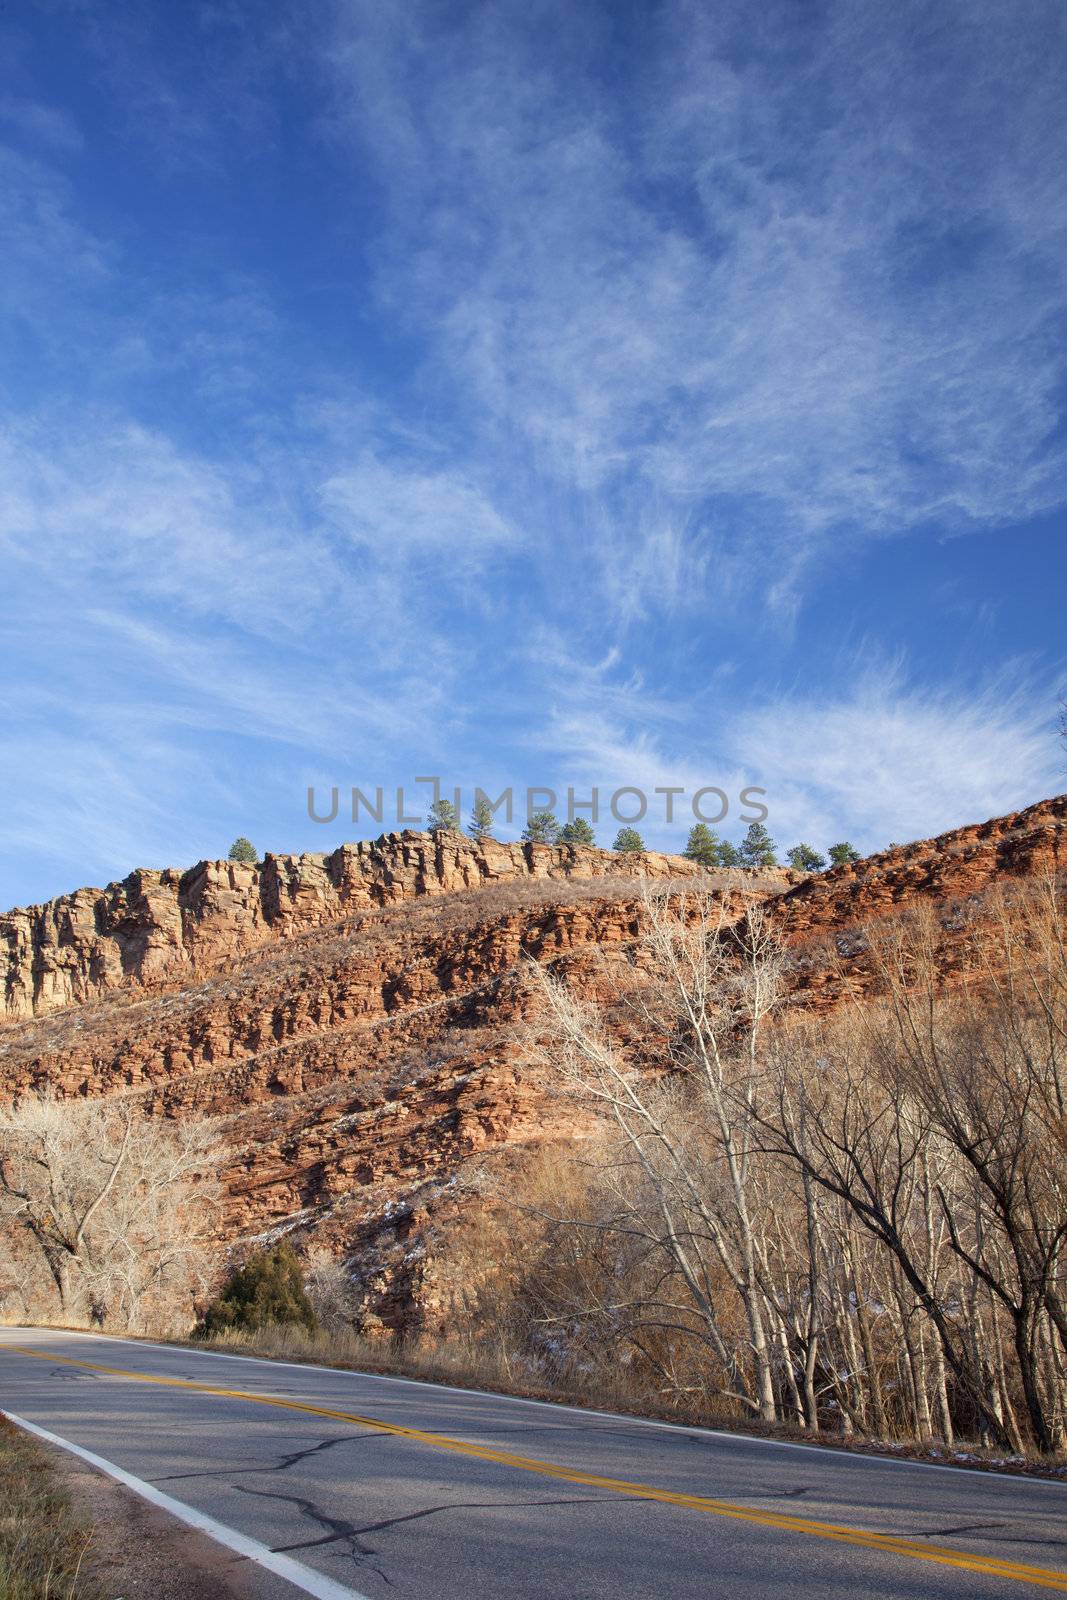 highway in northern Colorado near Fort Collins with redstone cliffs, late fall scenery